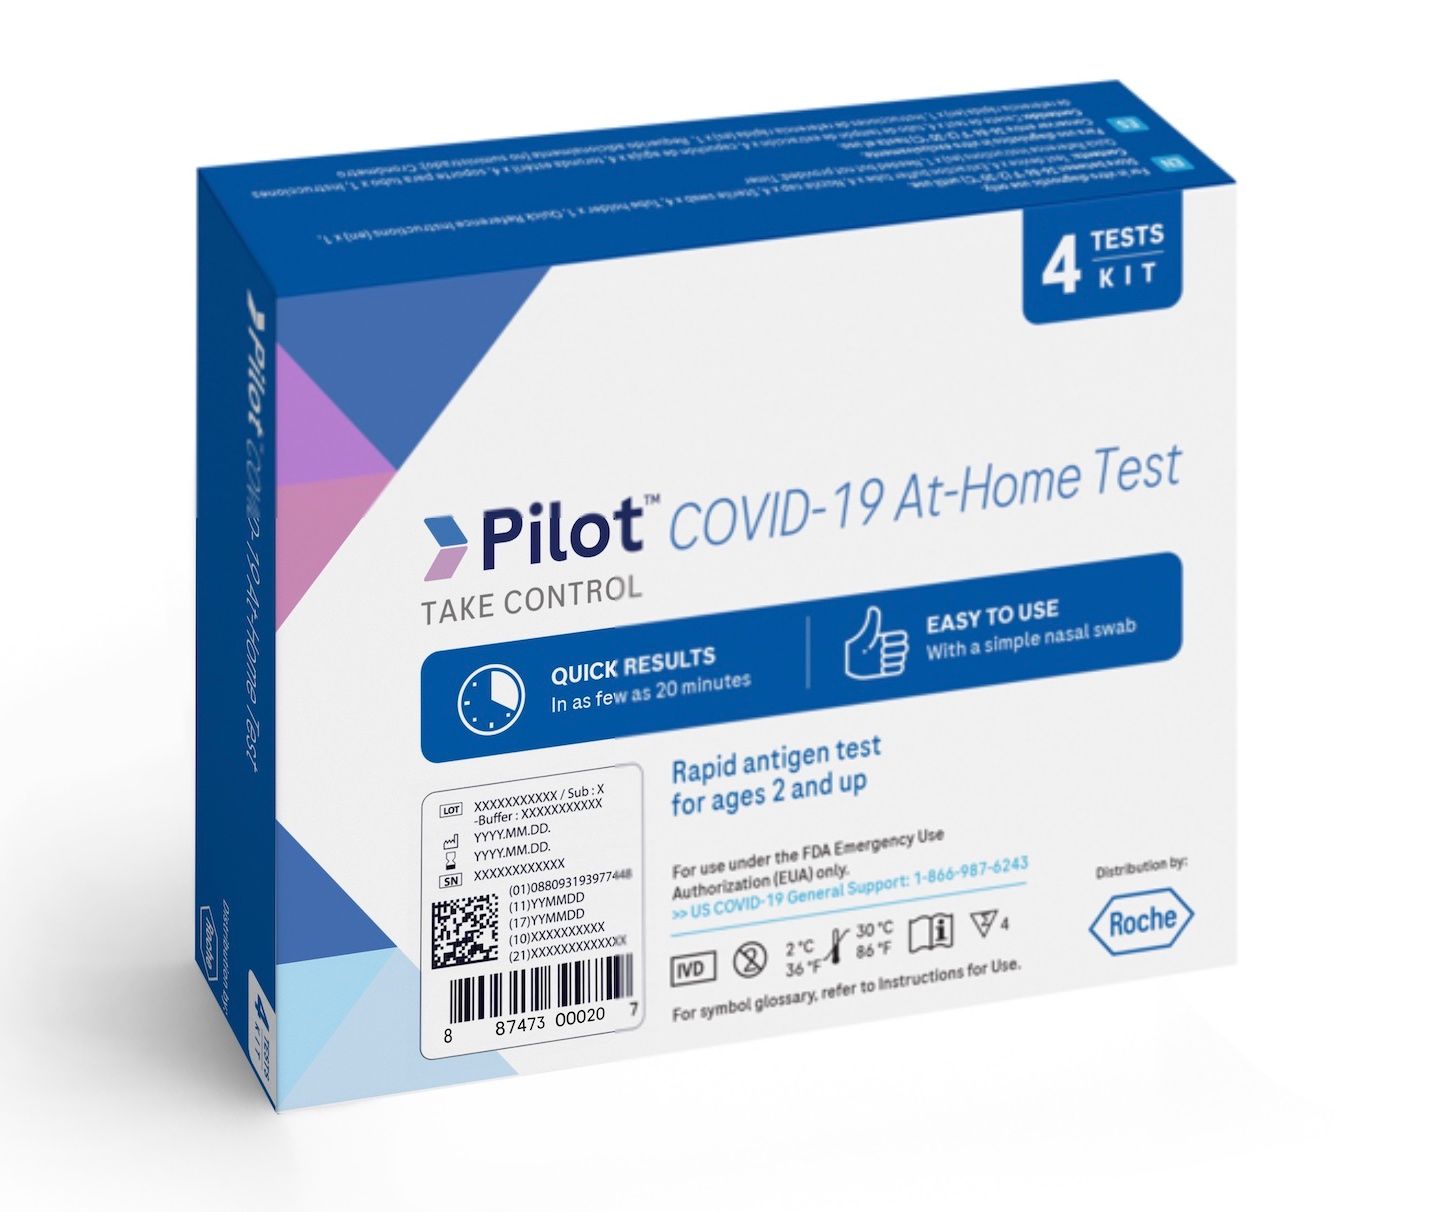 Limited Inventory: Pilot COVID-19 At-Home Test distributed by Roche, 4 tests (Insurance Eligible)